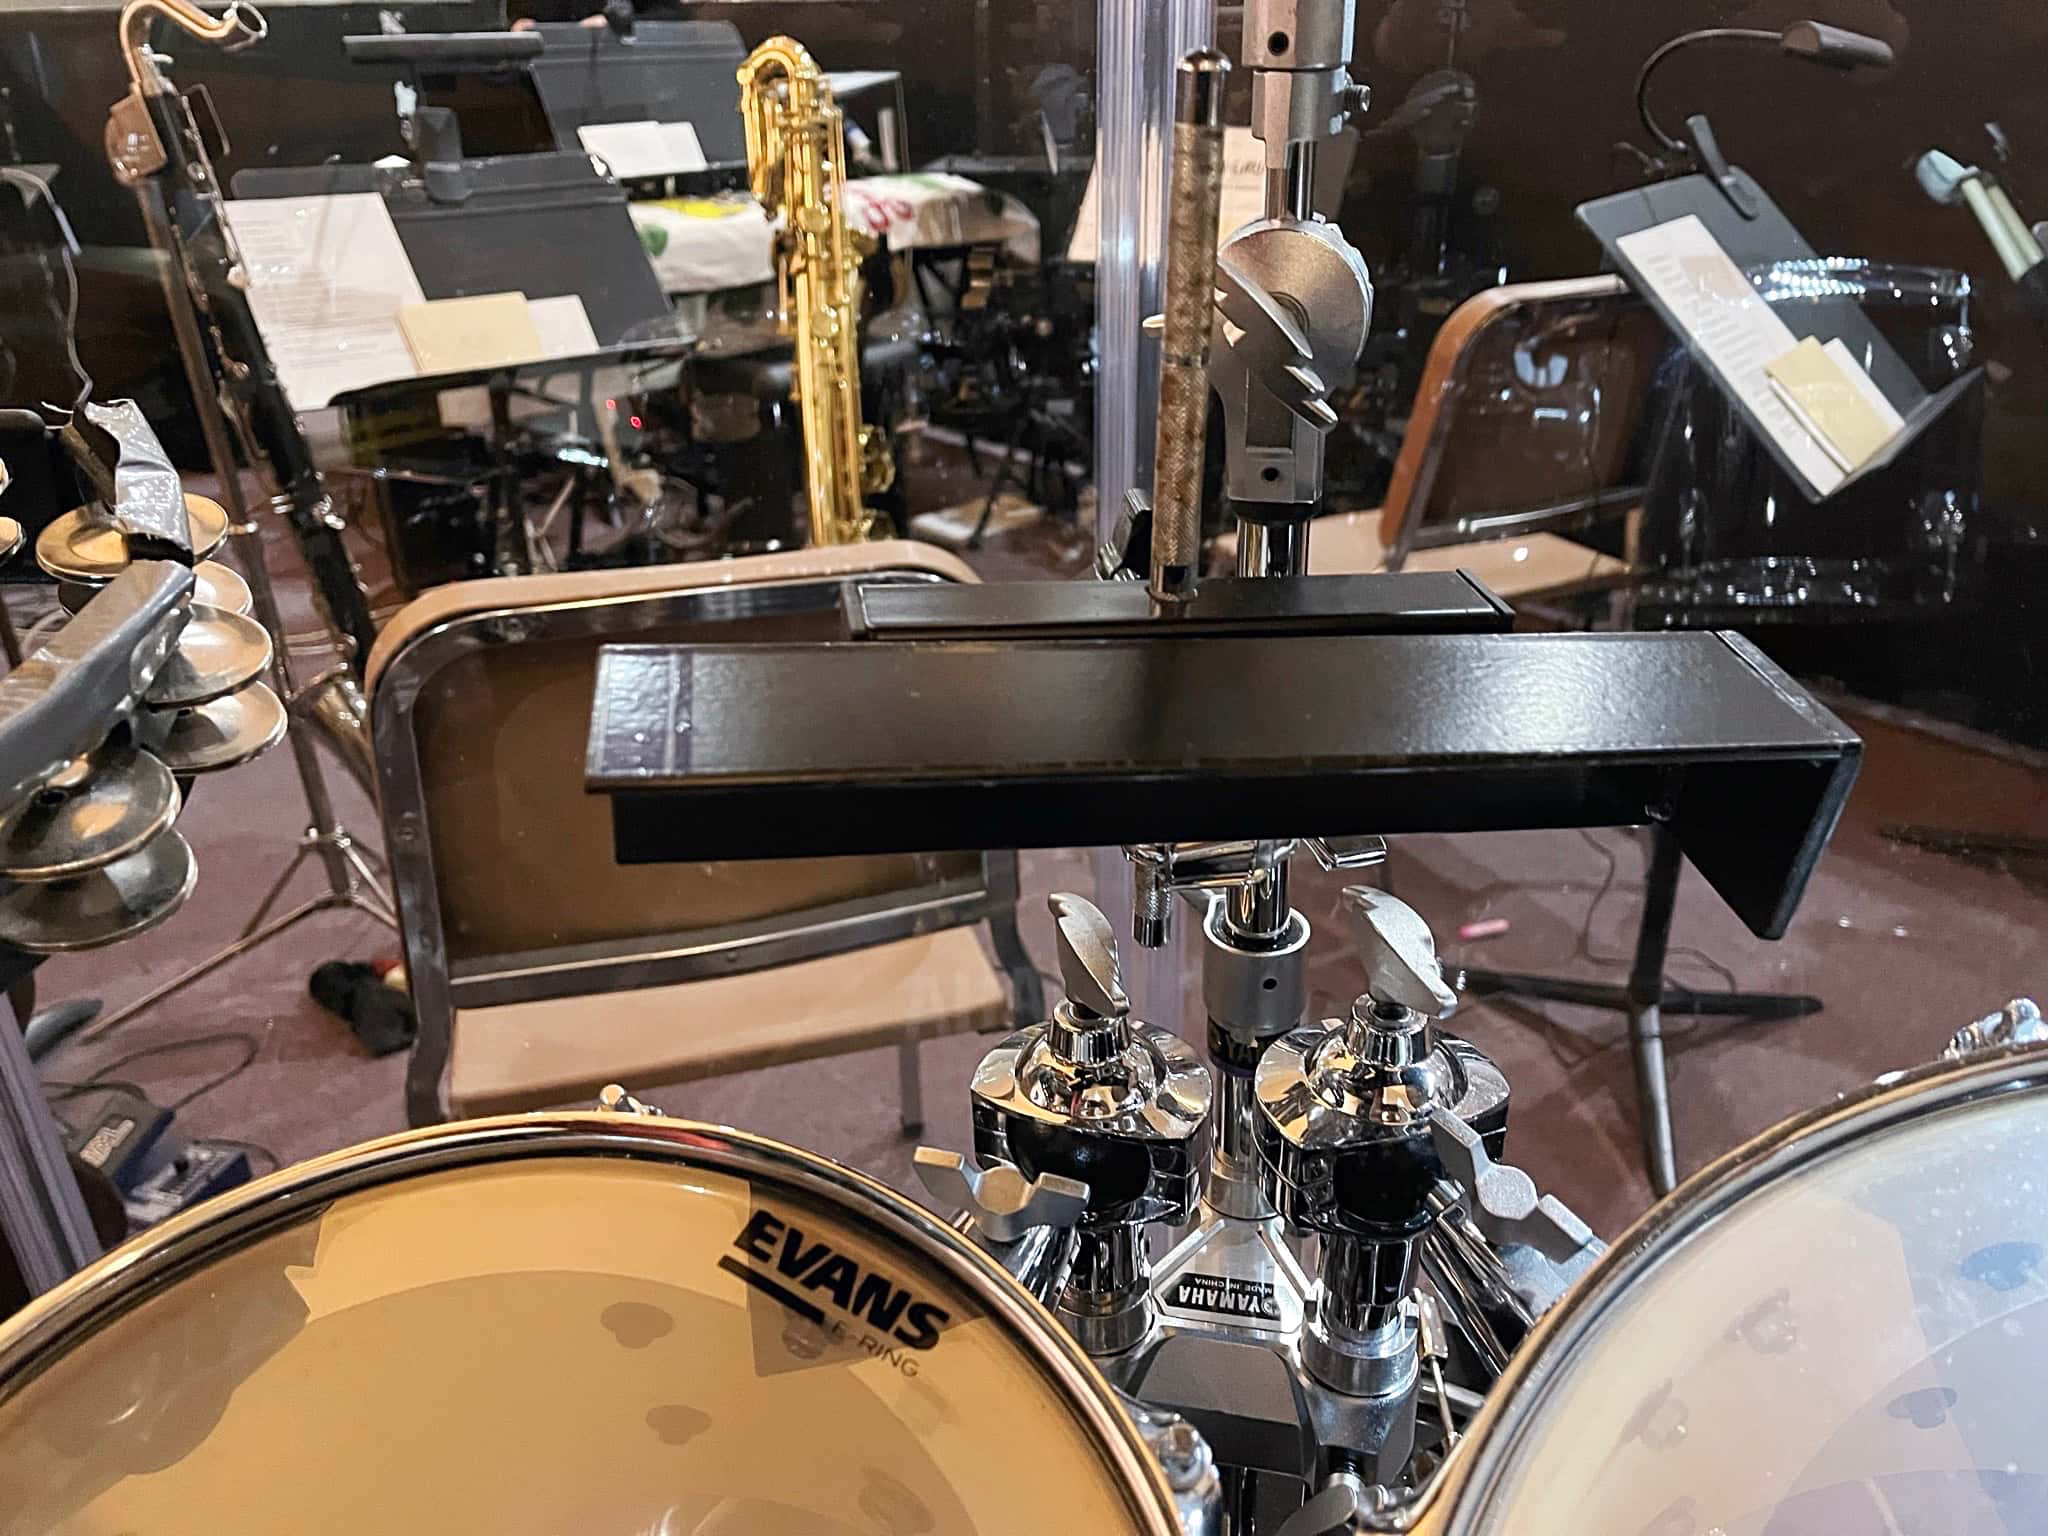 Ron Grassi's drum set setup for Mean Girls at Archbishop Performing Arts, in Warminster, Pennsylvania.